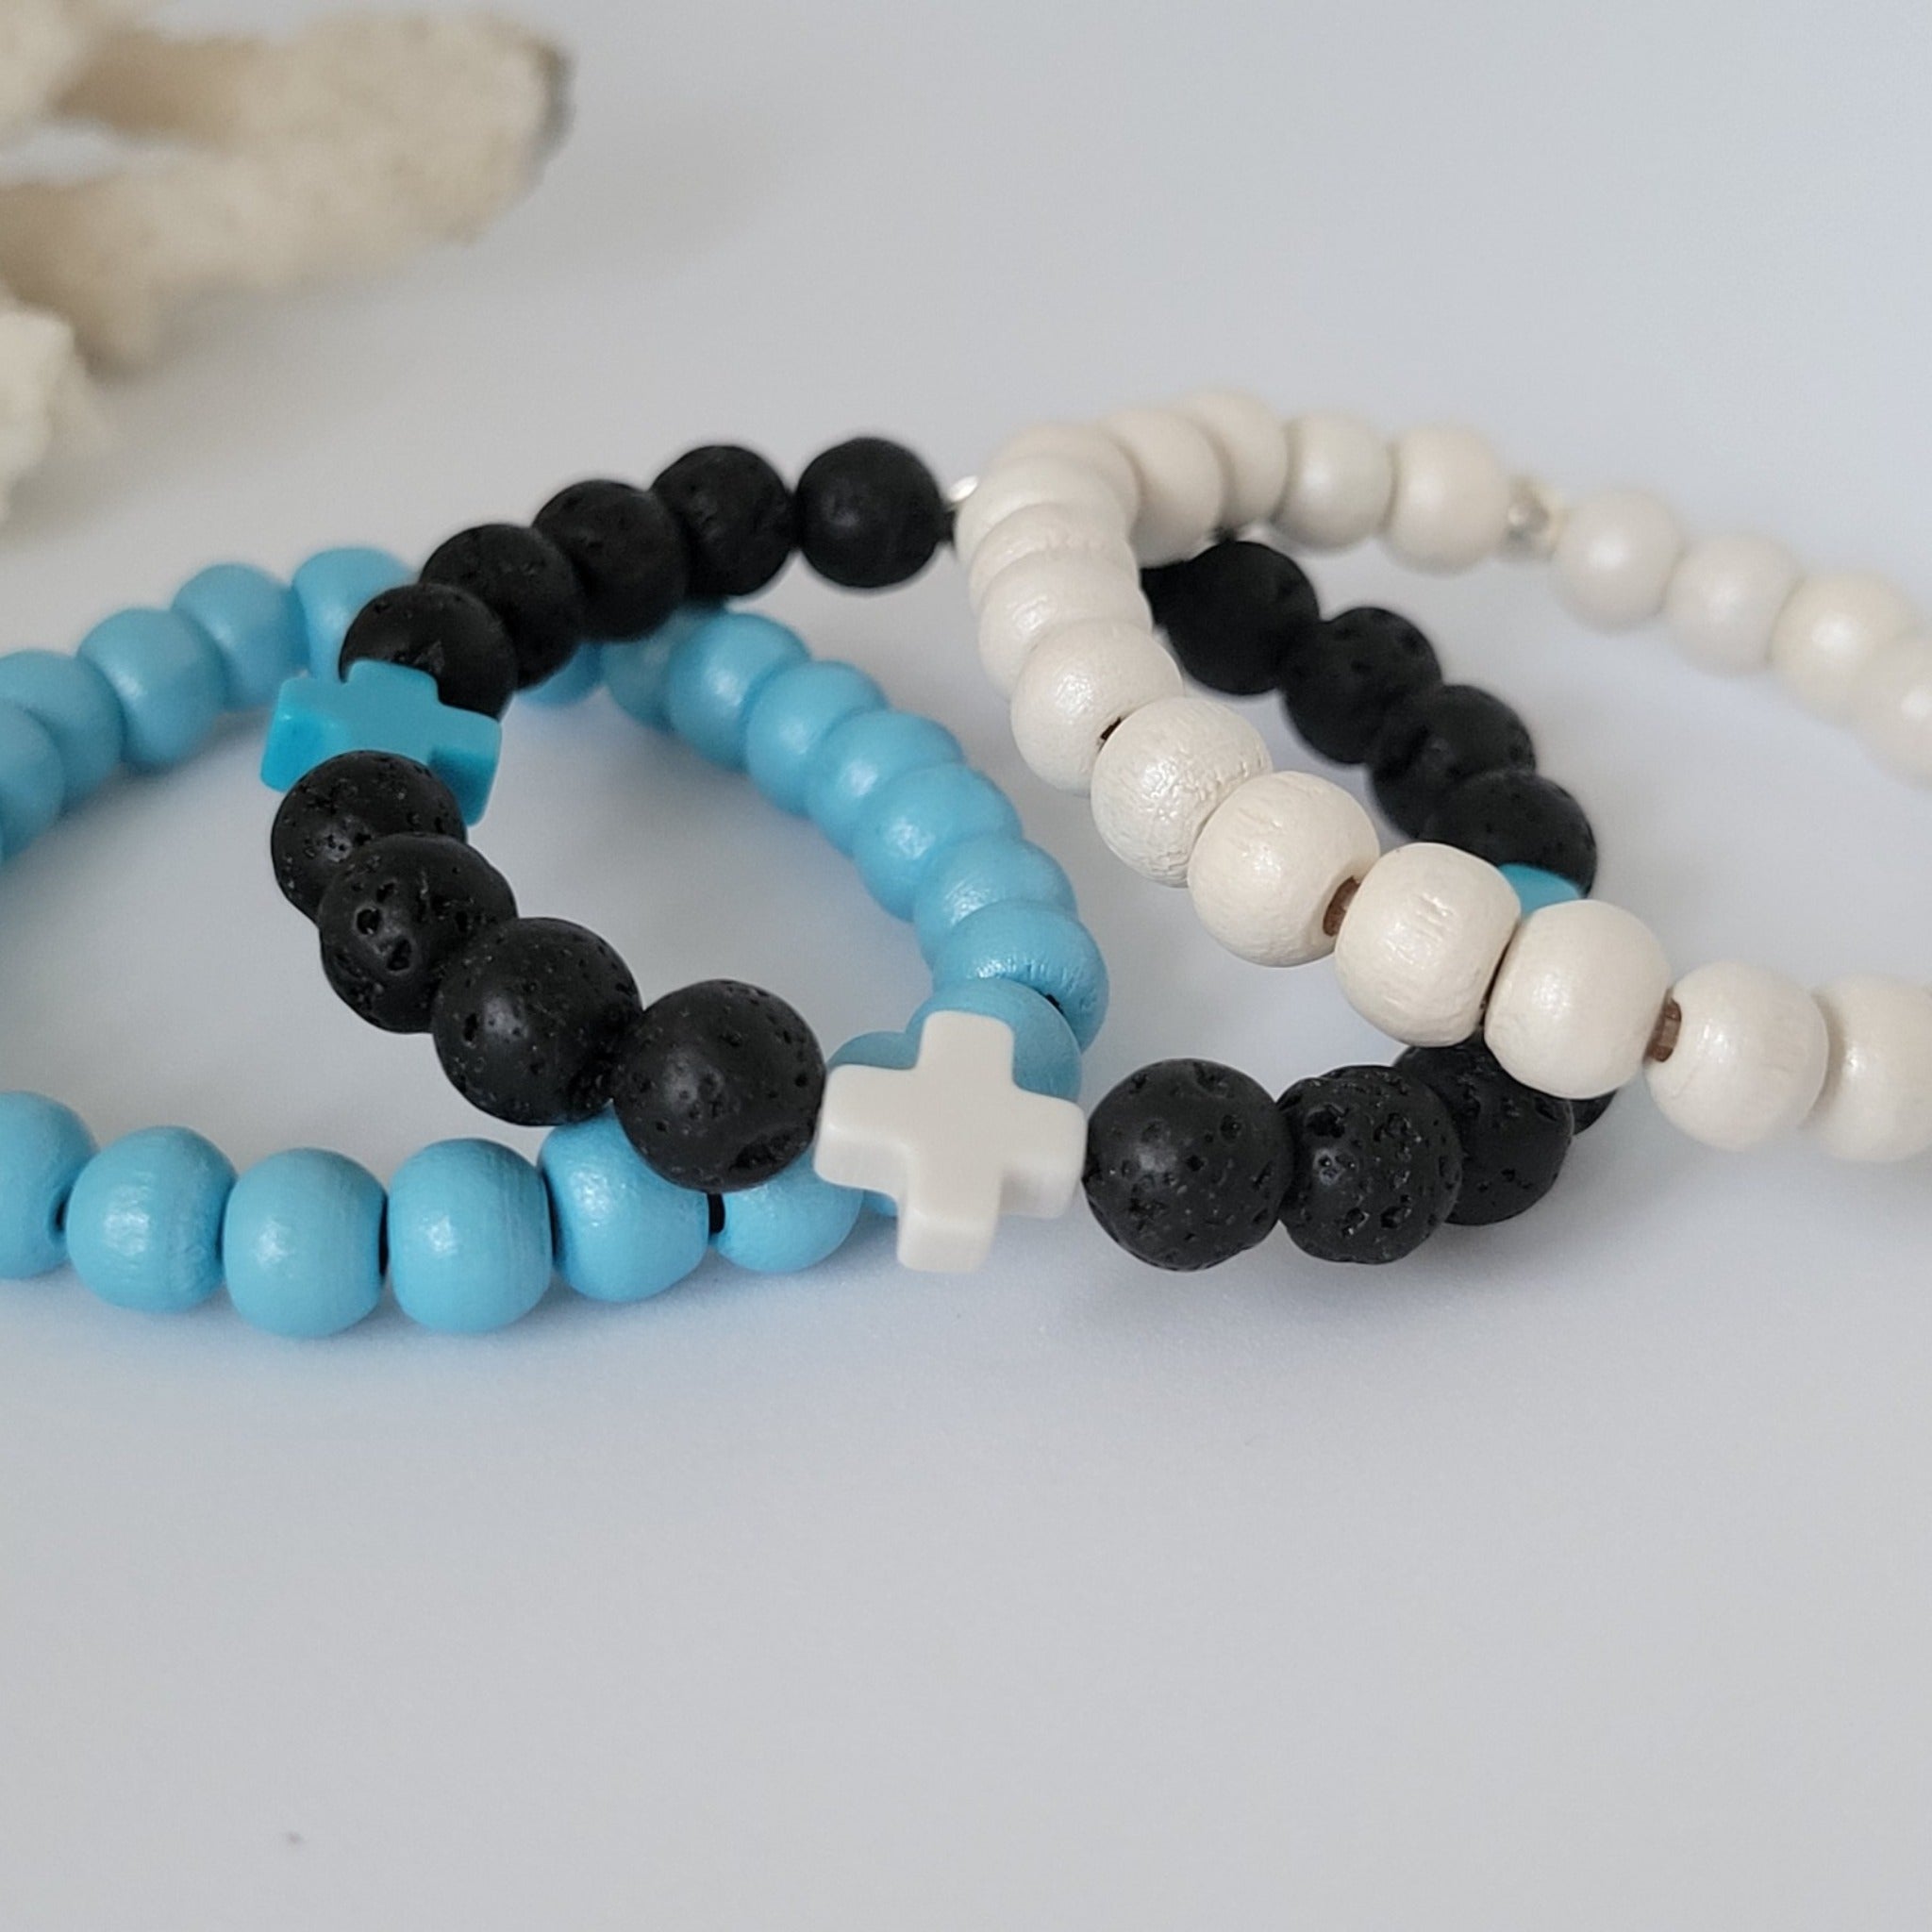 Children's or Infants Painted Wooden Bead Bracelets - Boys and Girls